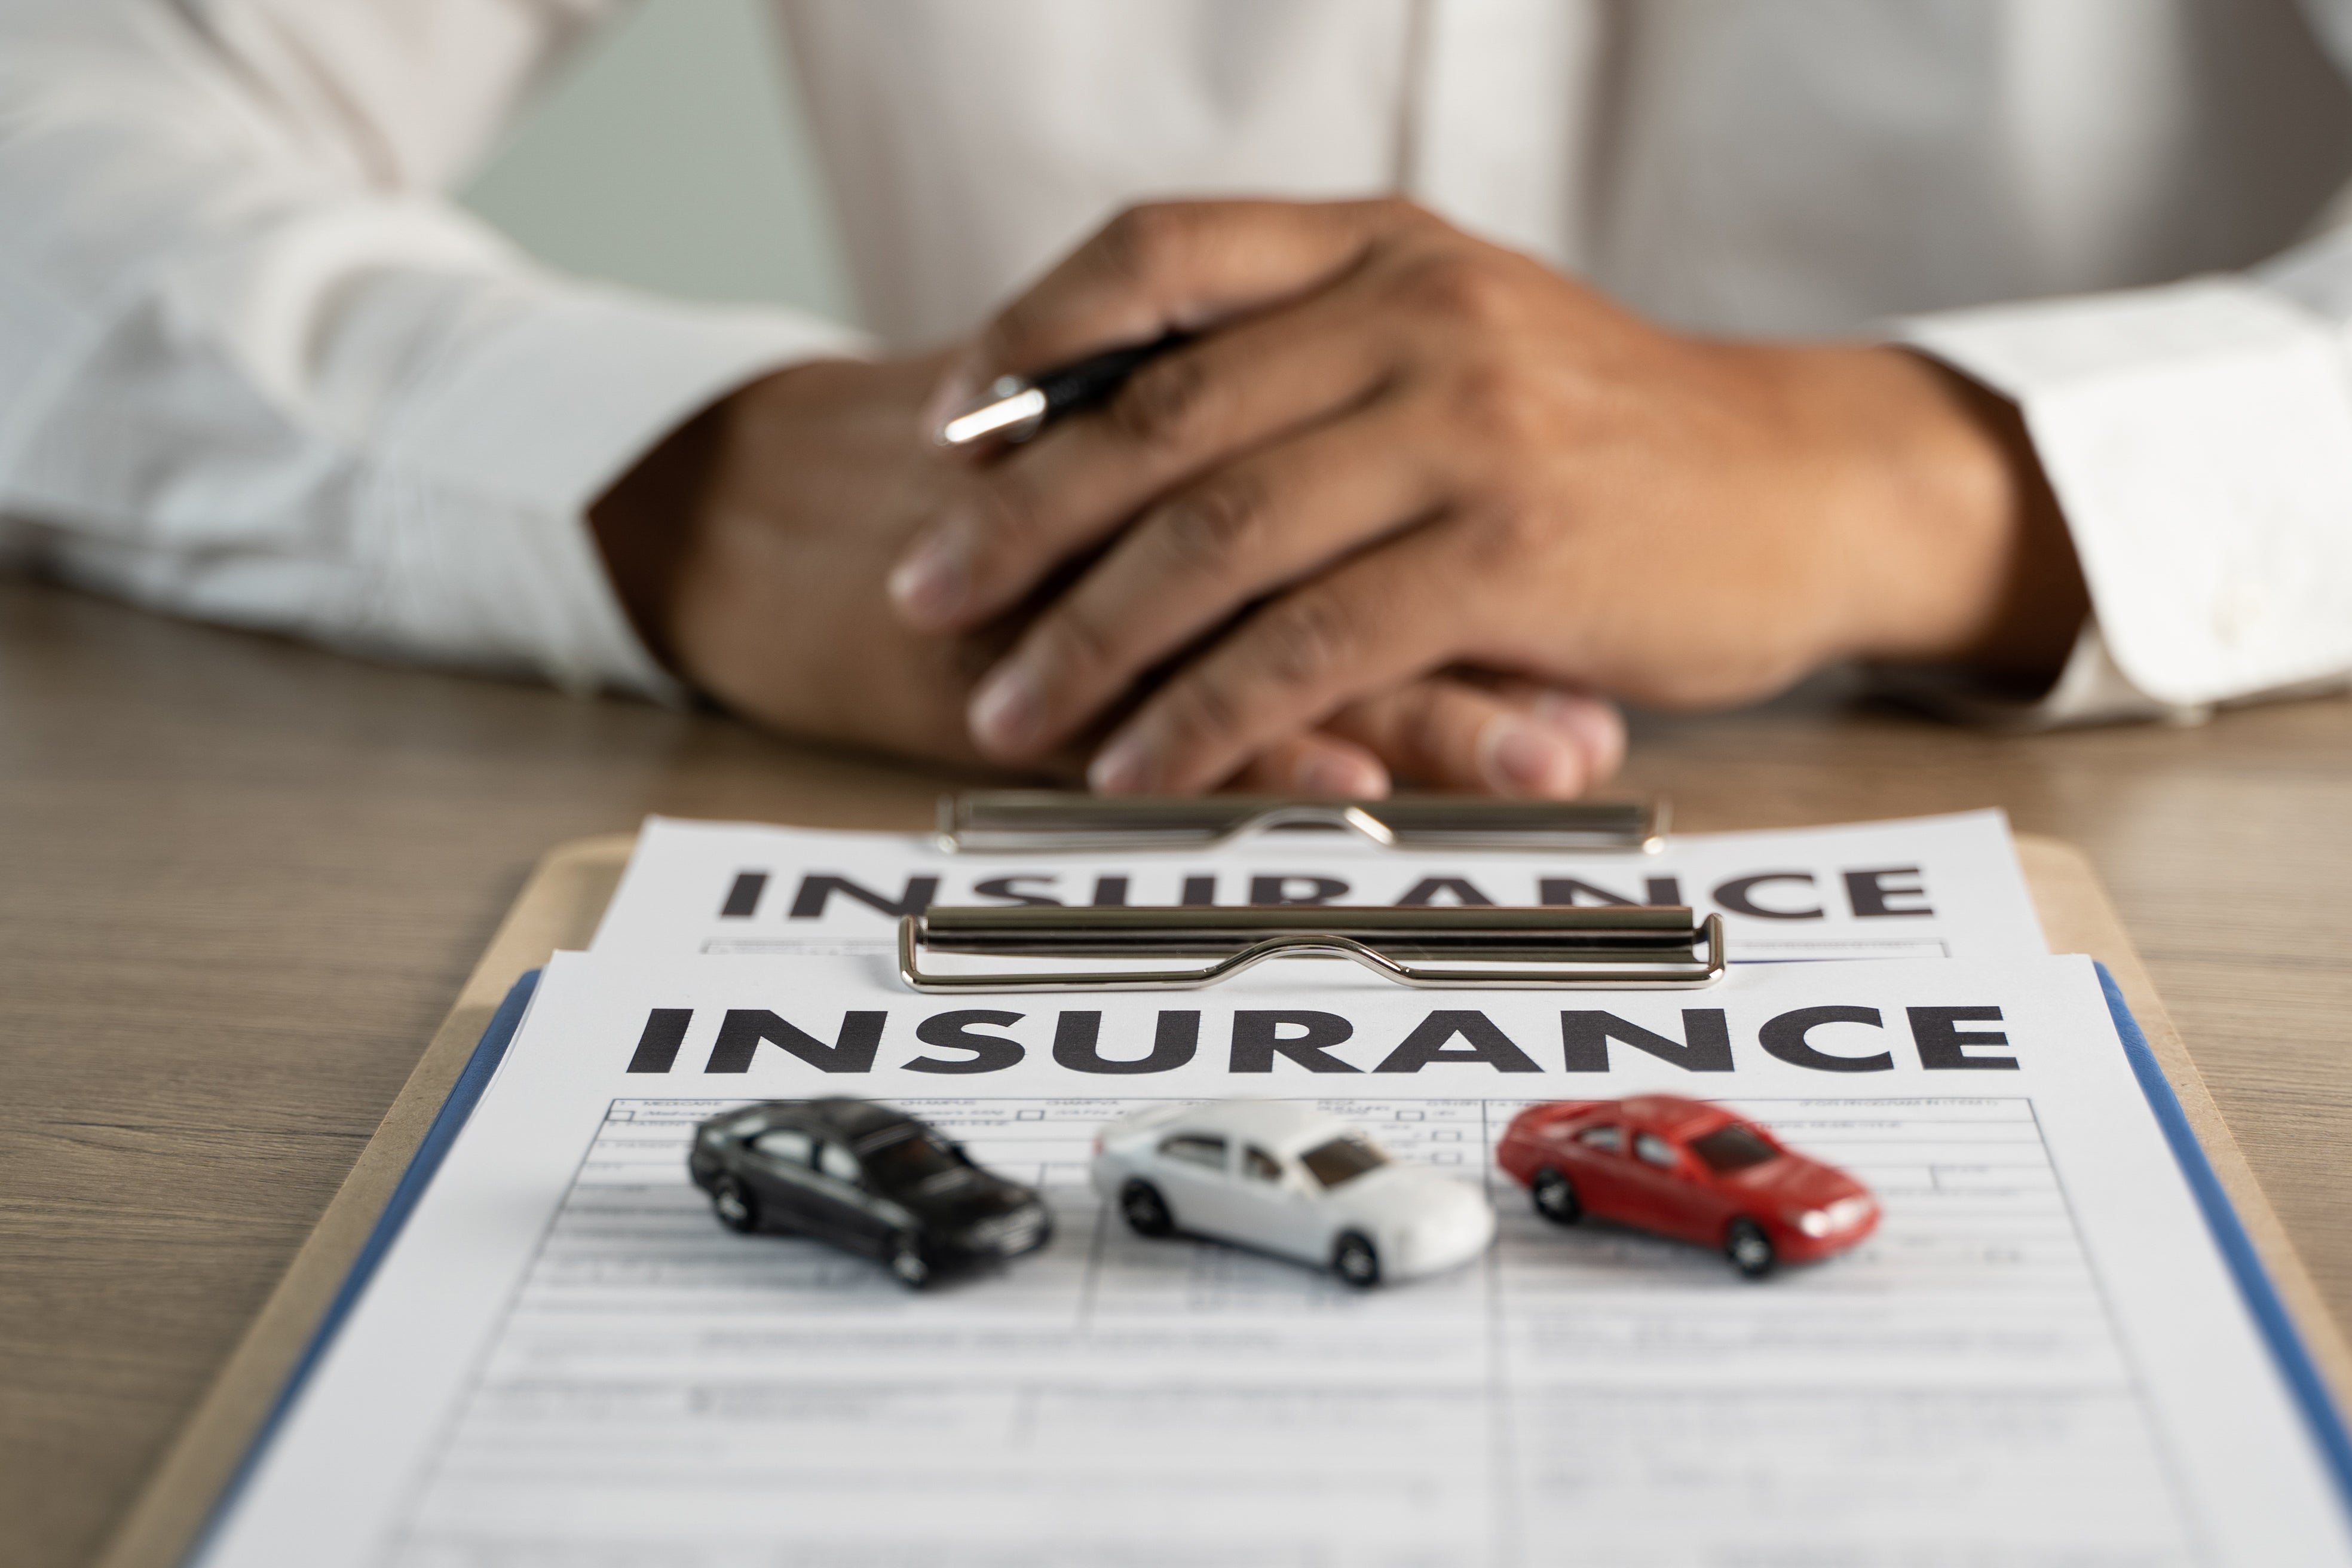 The average cost of car insurance in the UK has hit a record high